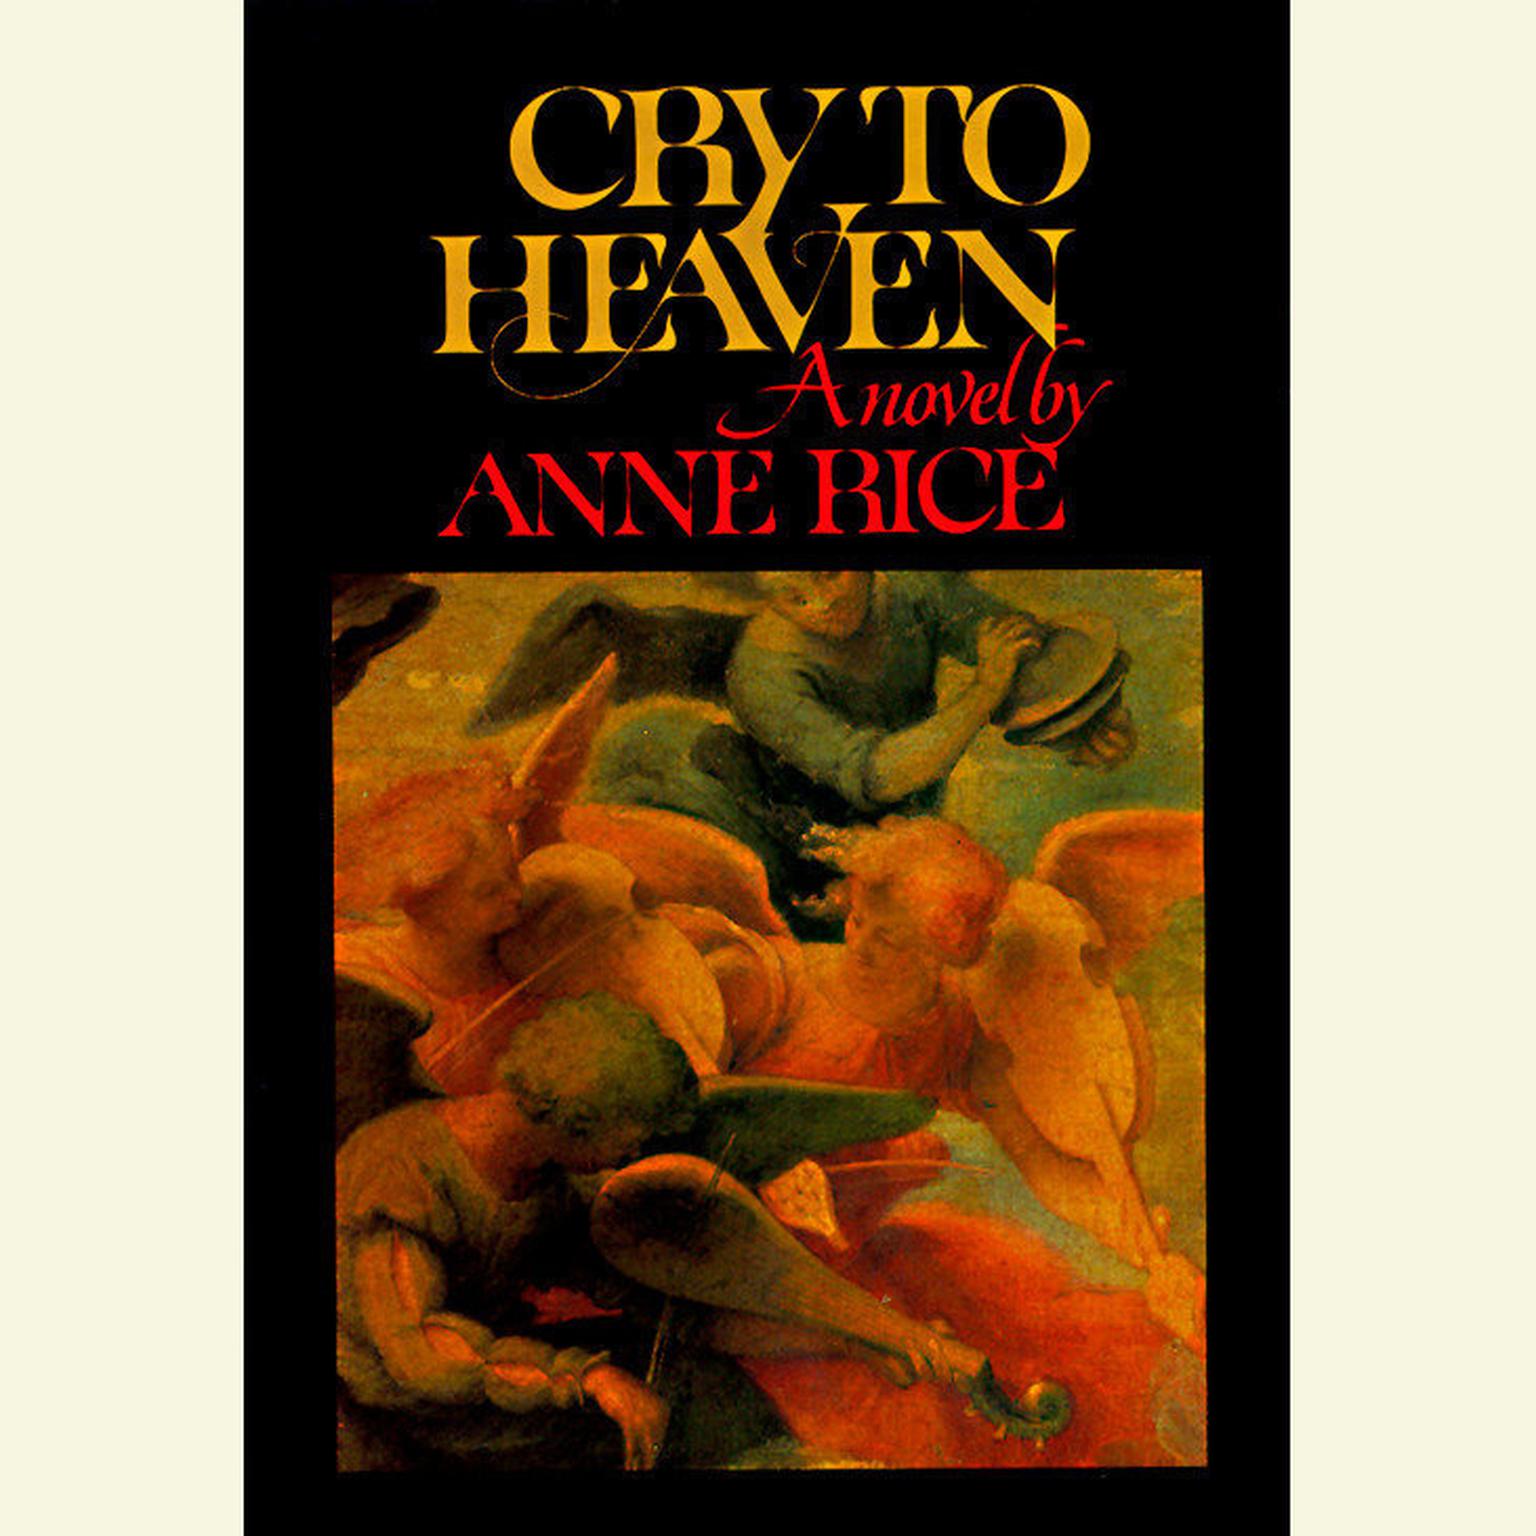 Cry to Heaven (Abridged) Audiobook, by Anne Rice